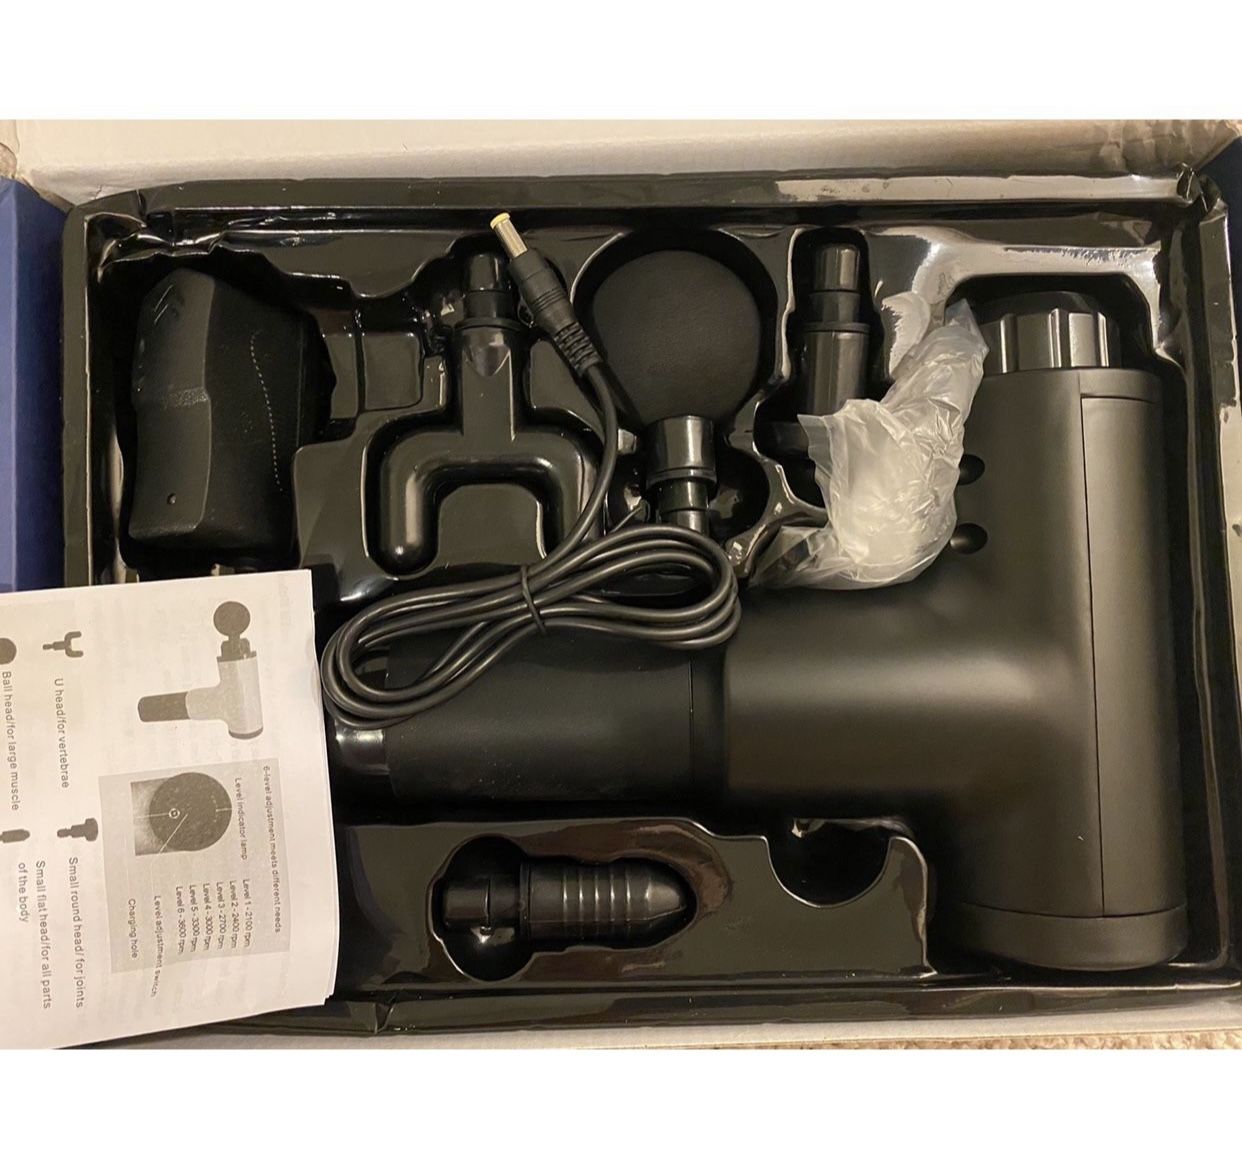 Brand New 2020 Upgraded Muscle Massage Gun ,Handheld Deep Tissue And Rechargeable Quiet massager